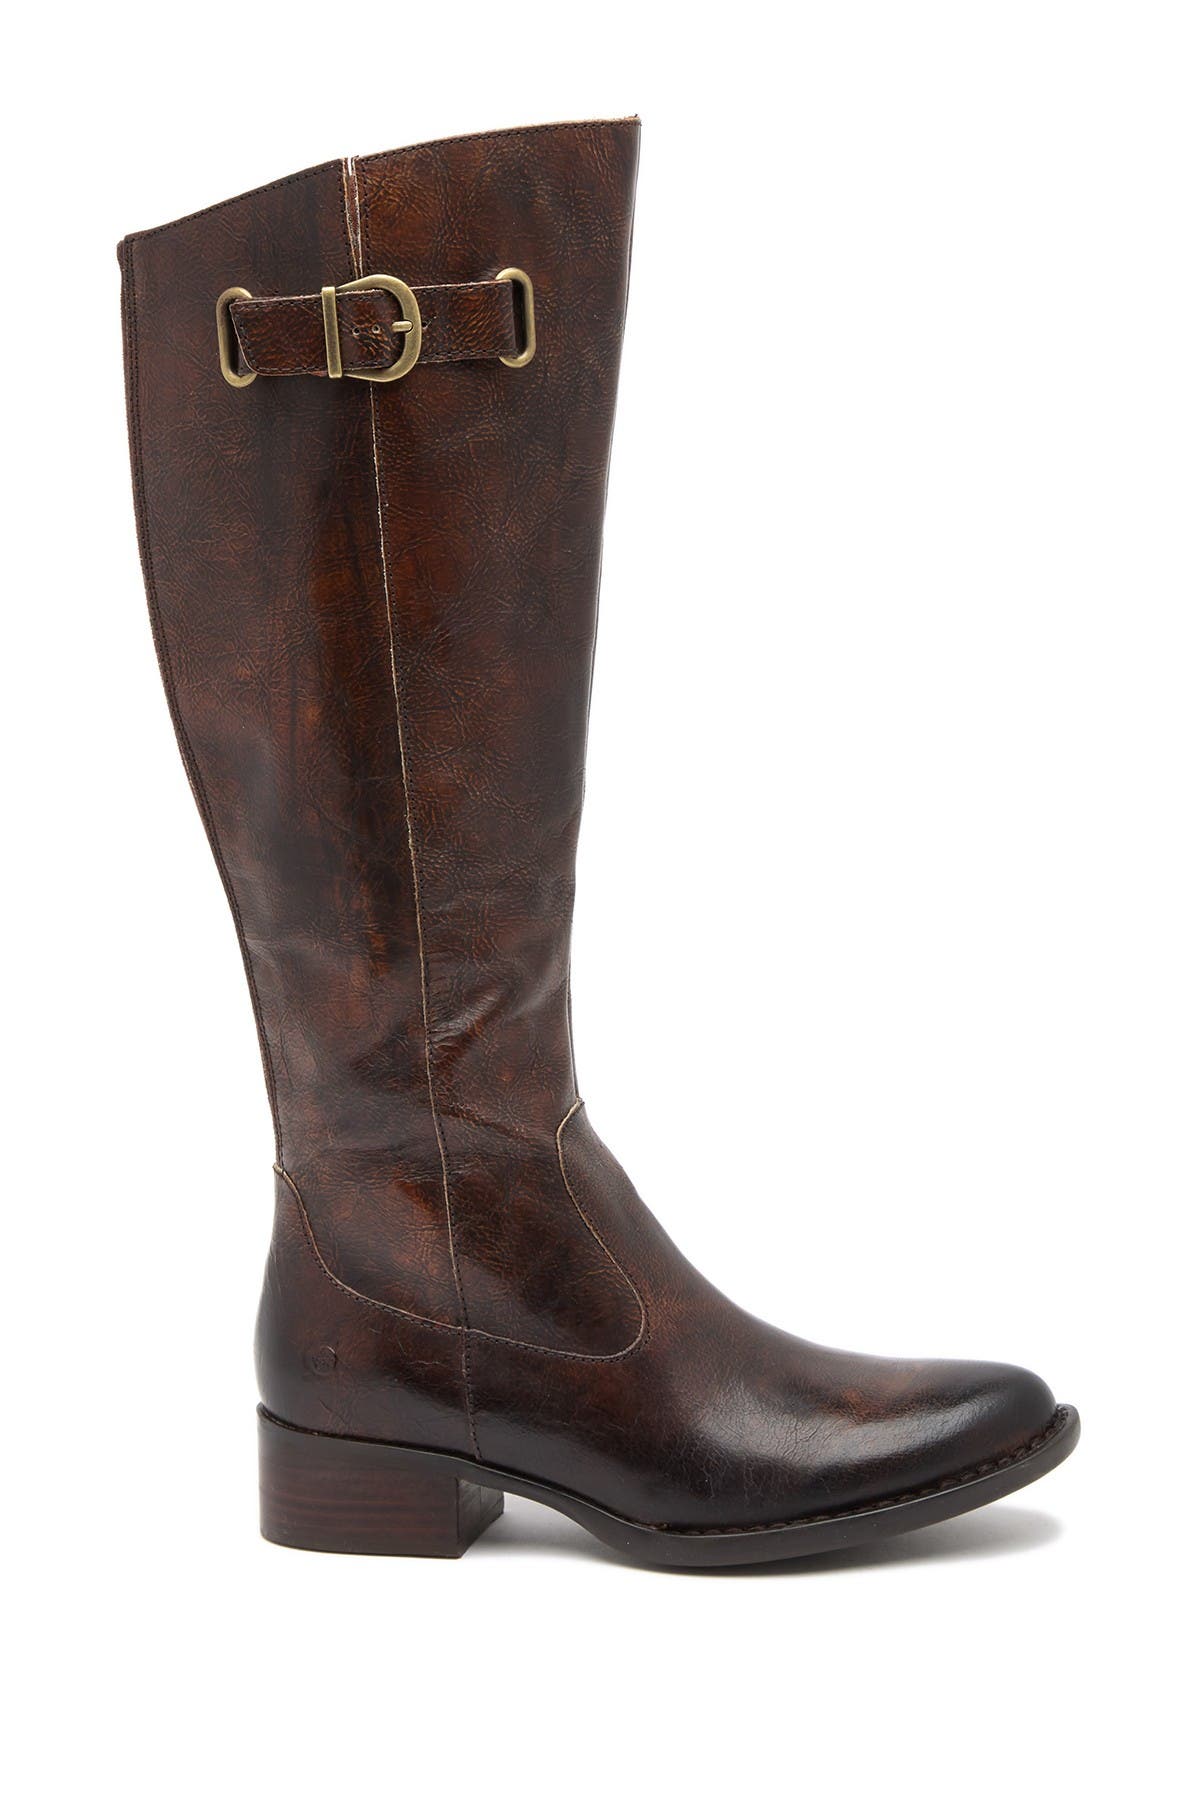 born cort leather knee high boot